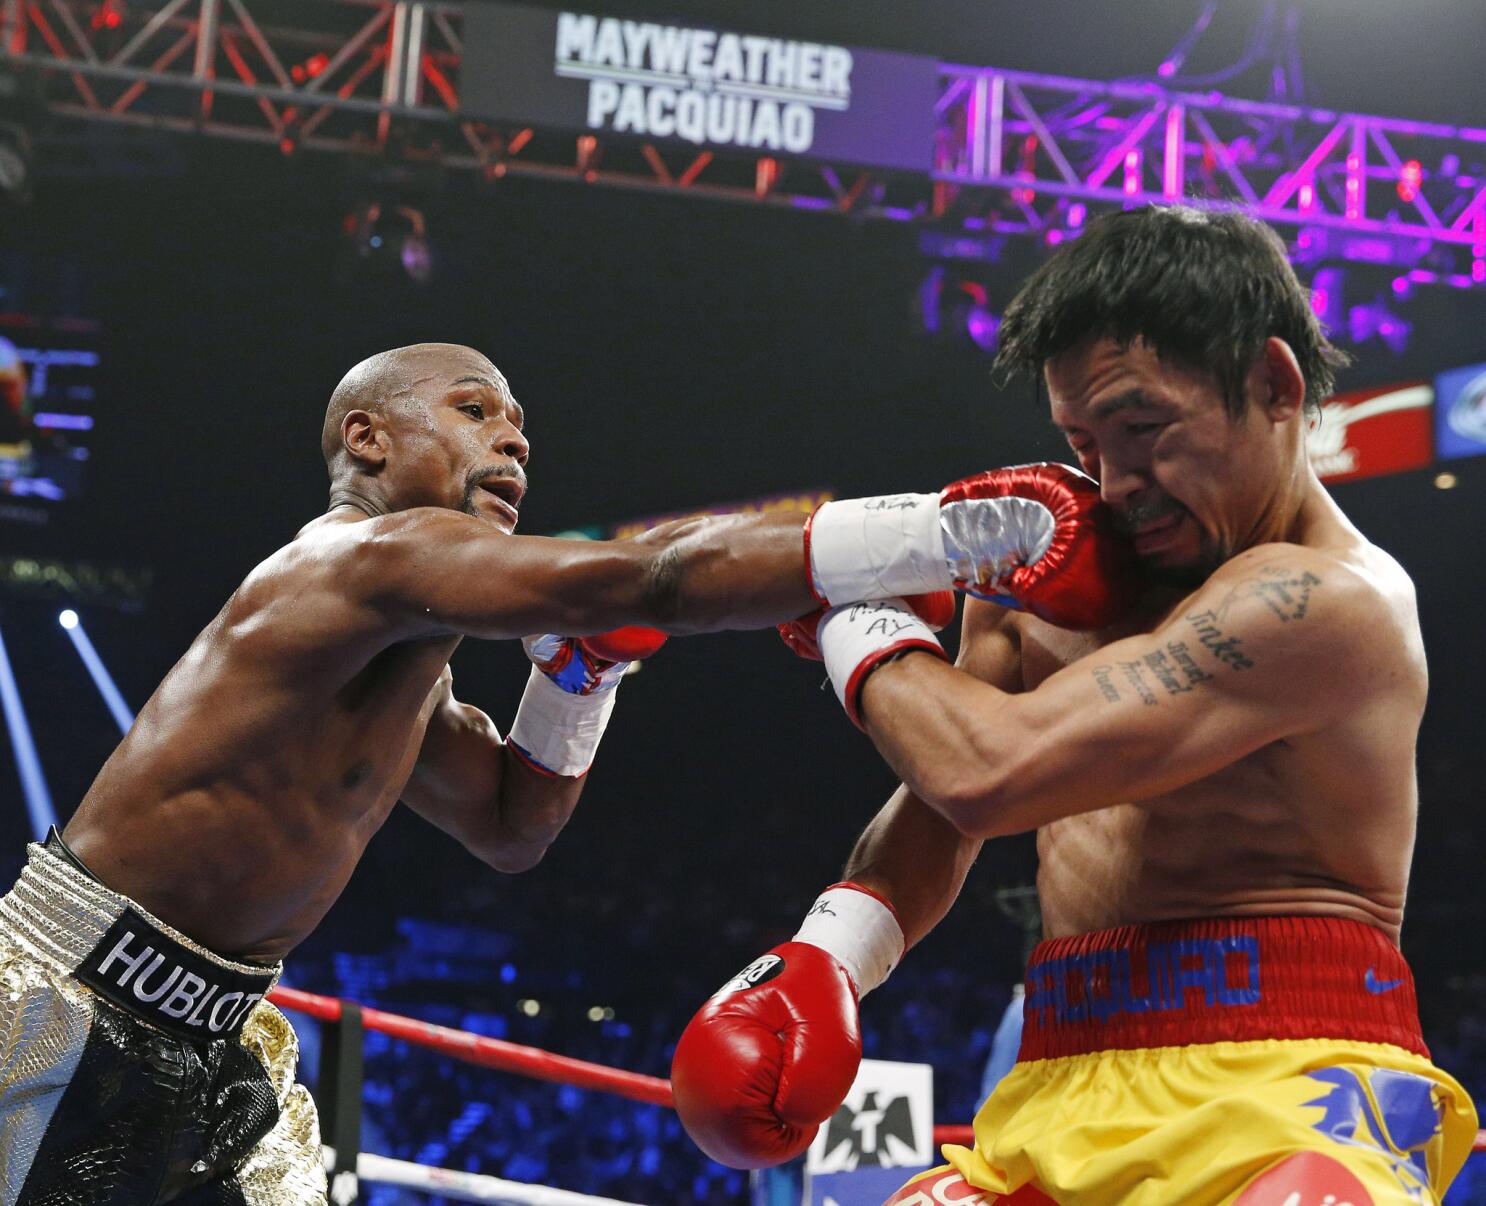 Floyd Mayweather retired with unbeaten boxing record but win over